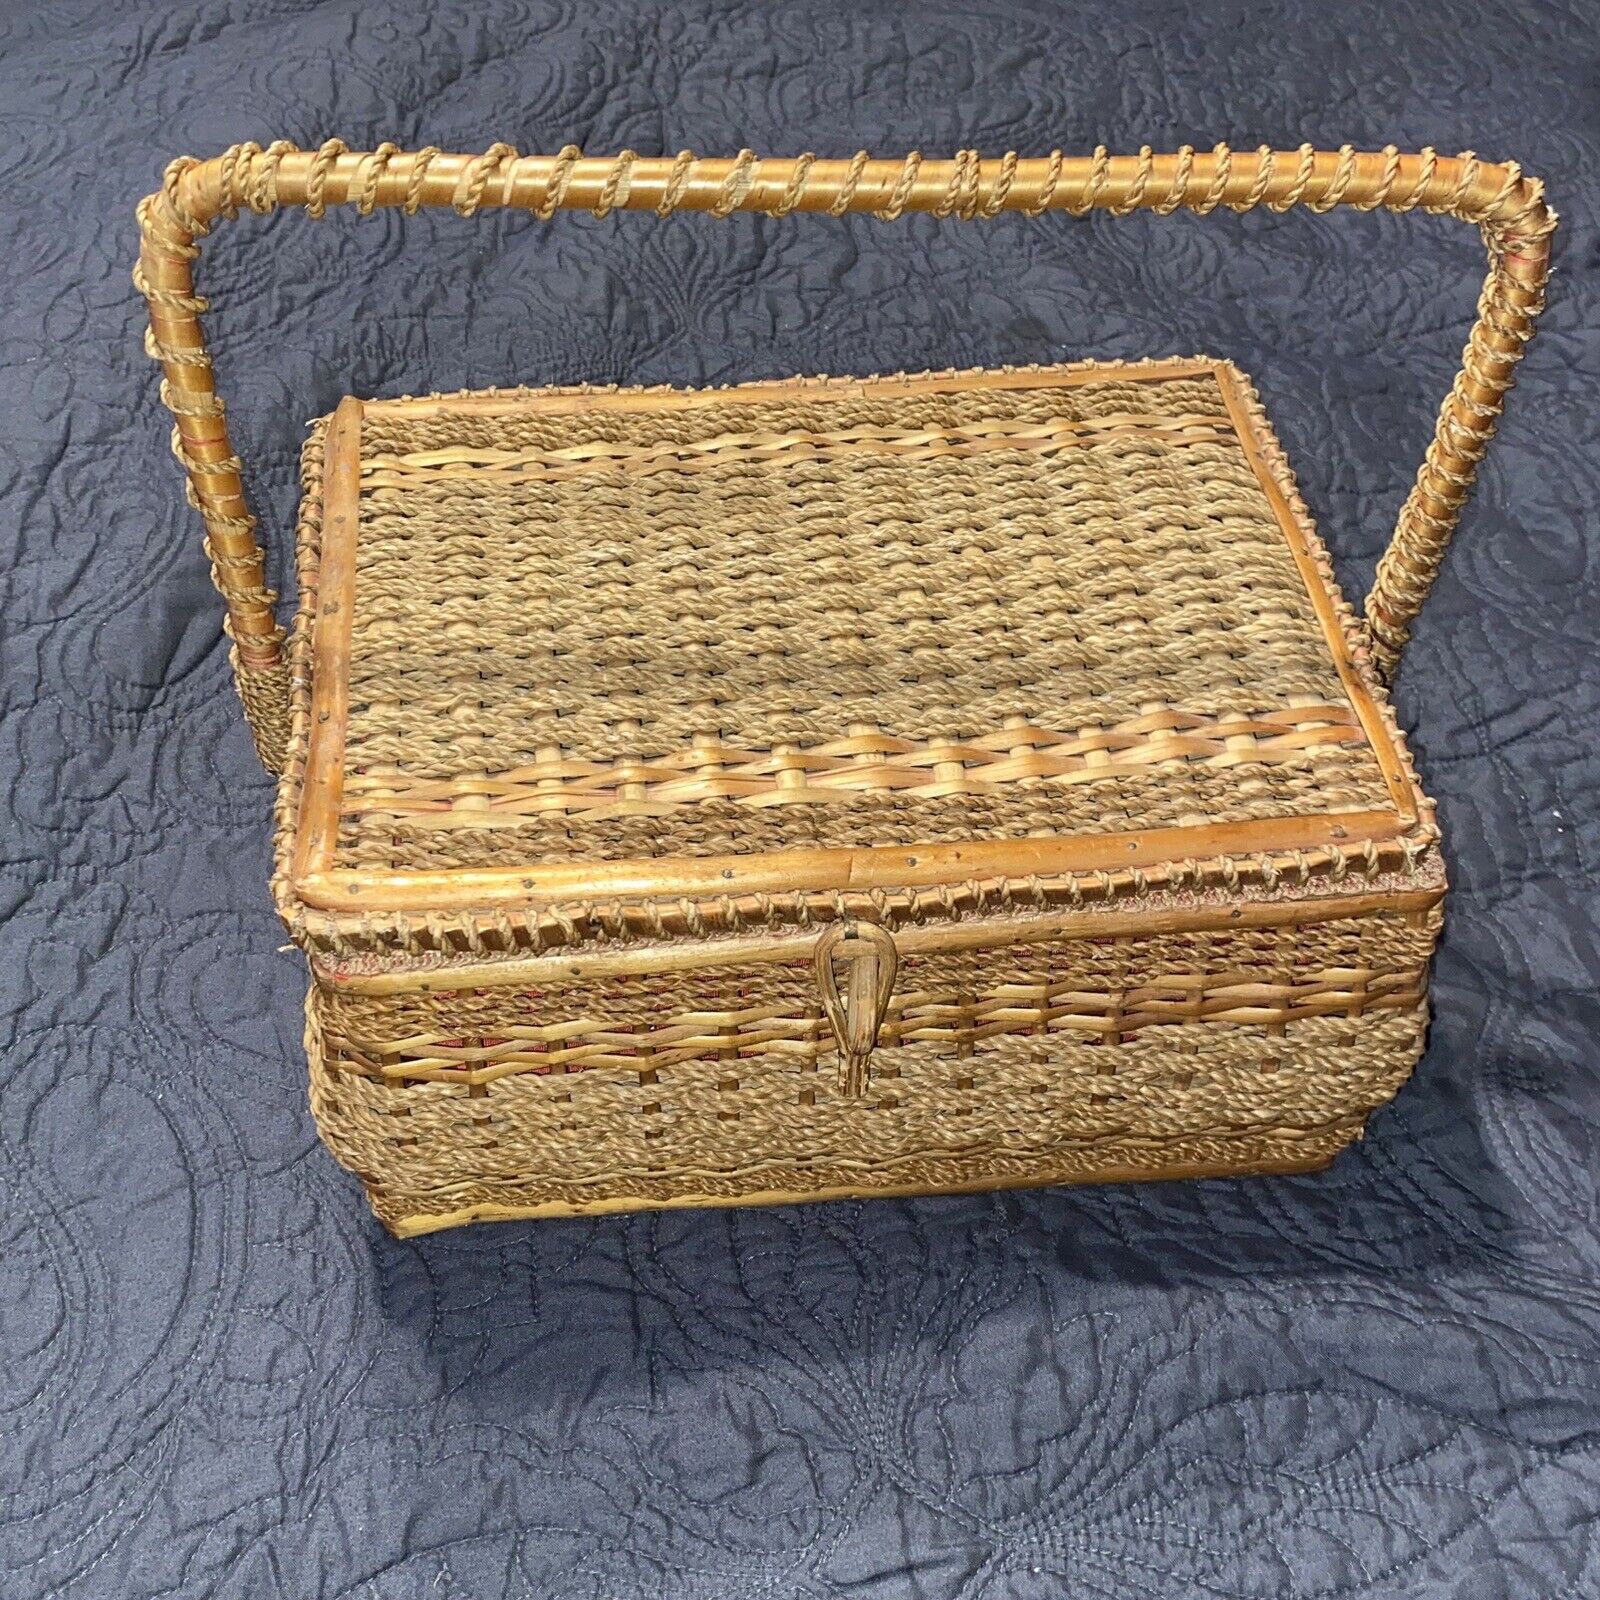 Vintage Wood Wicker Flip Top Sewing Basket with Red Lining - USB West Germany